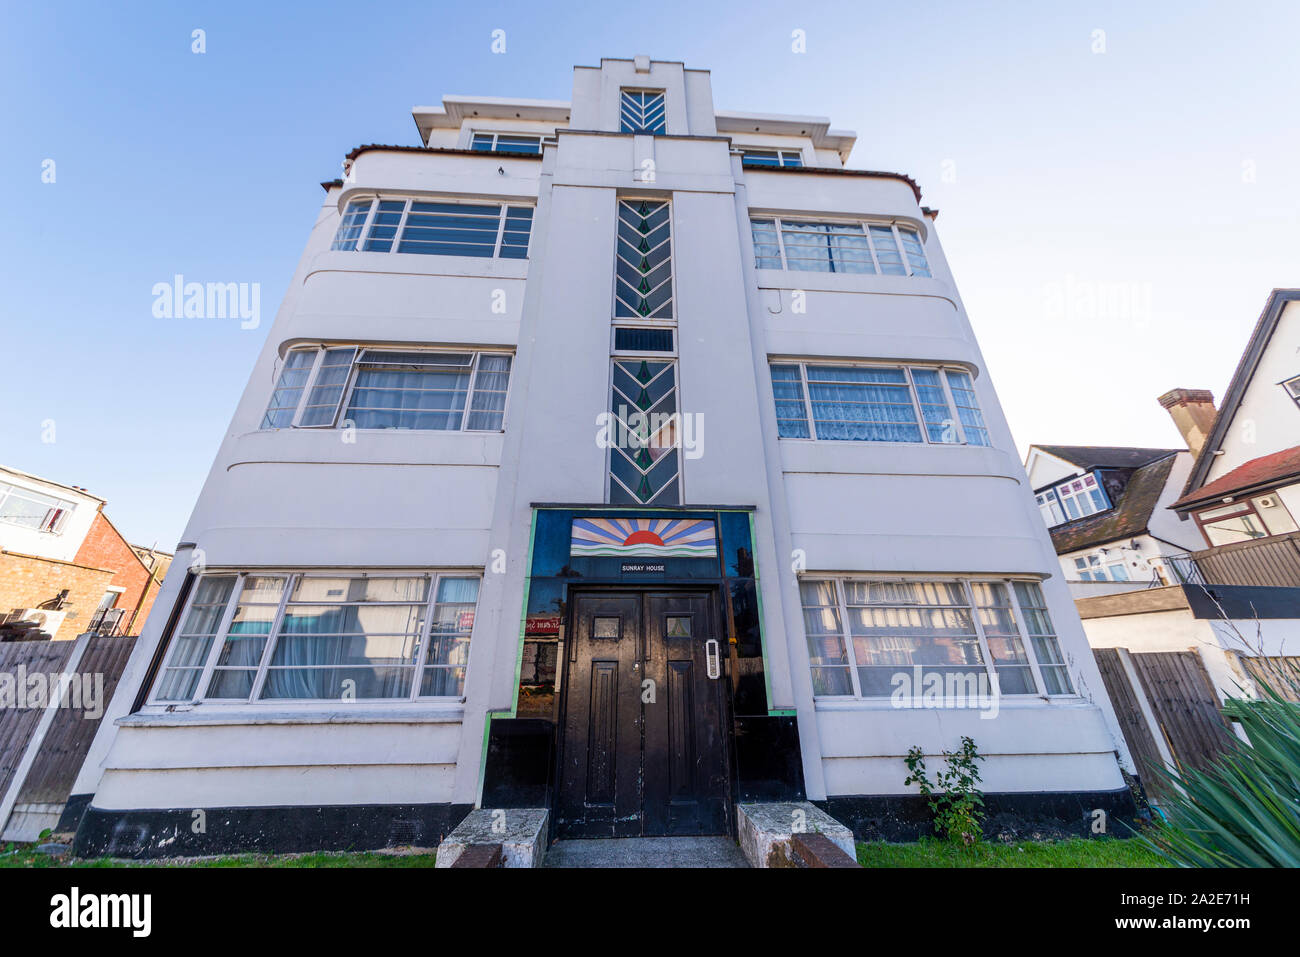 Sunray House art deco architecture flats building in Westcliff on Sea, Southend, Essex, UK. 1930s white property in Canewdon Road. By O H Cockrill Stock Photo